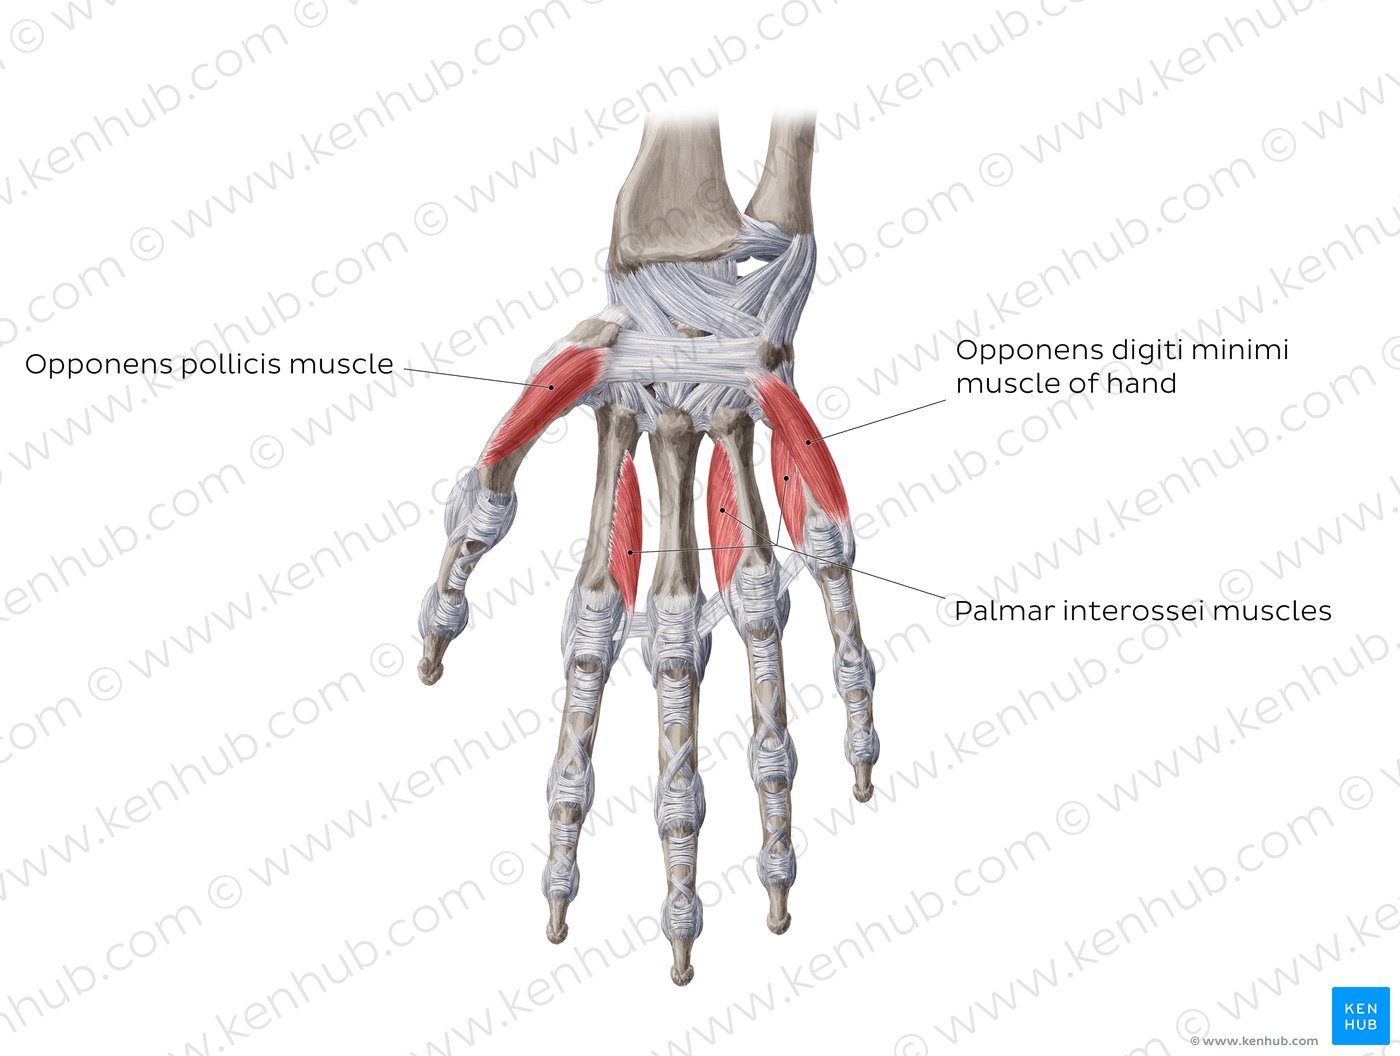 Muscles of the hand: deepest muscles